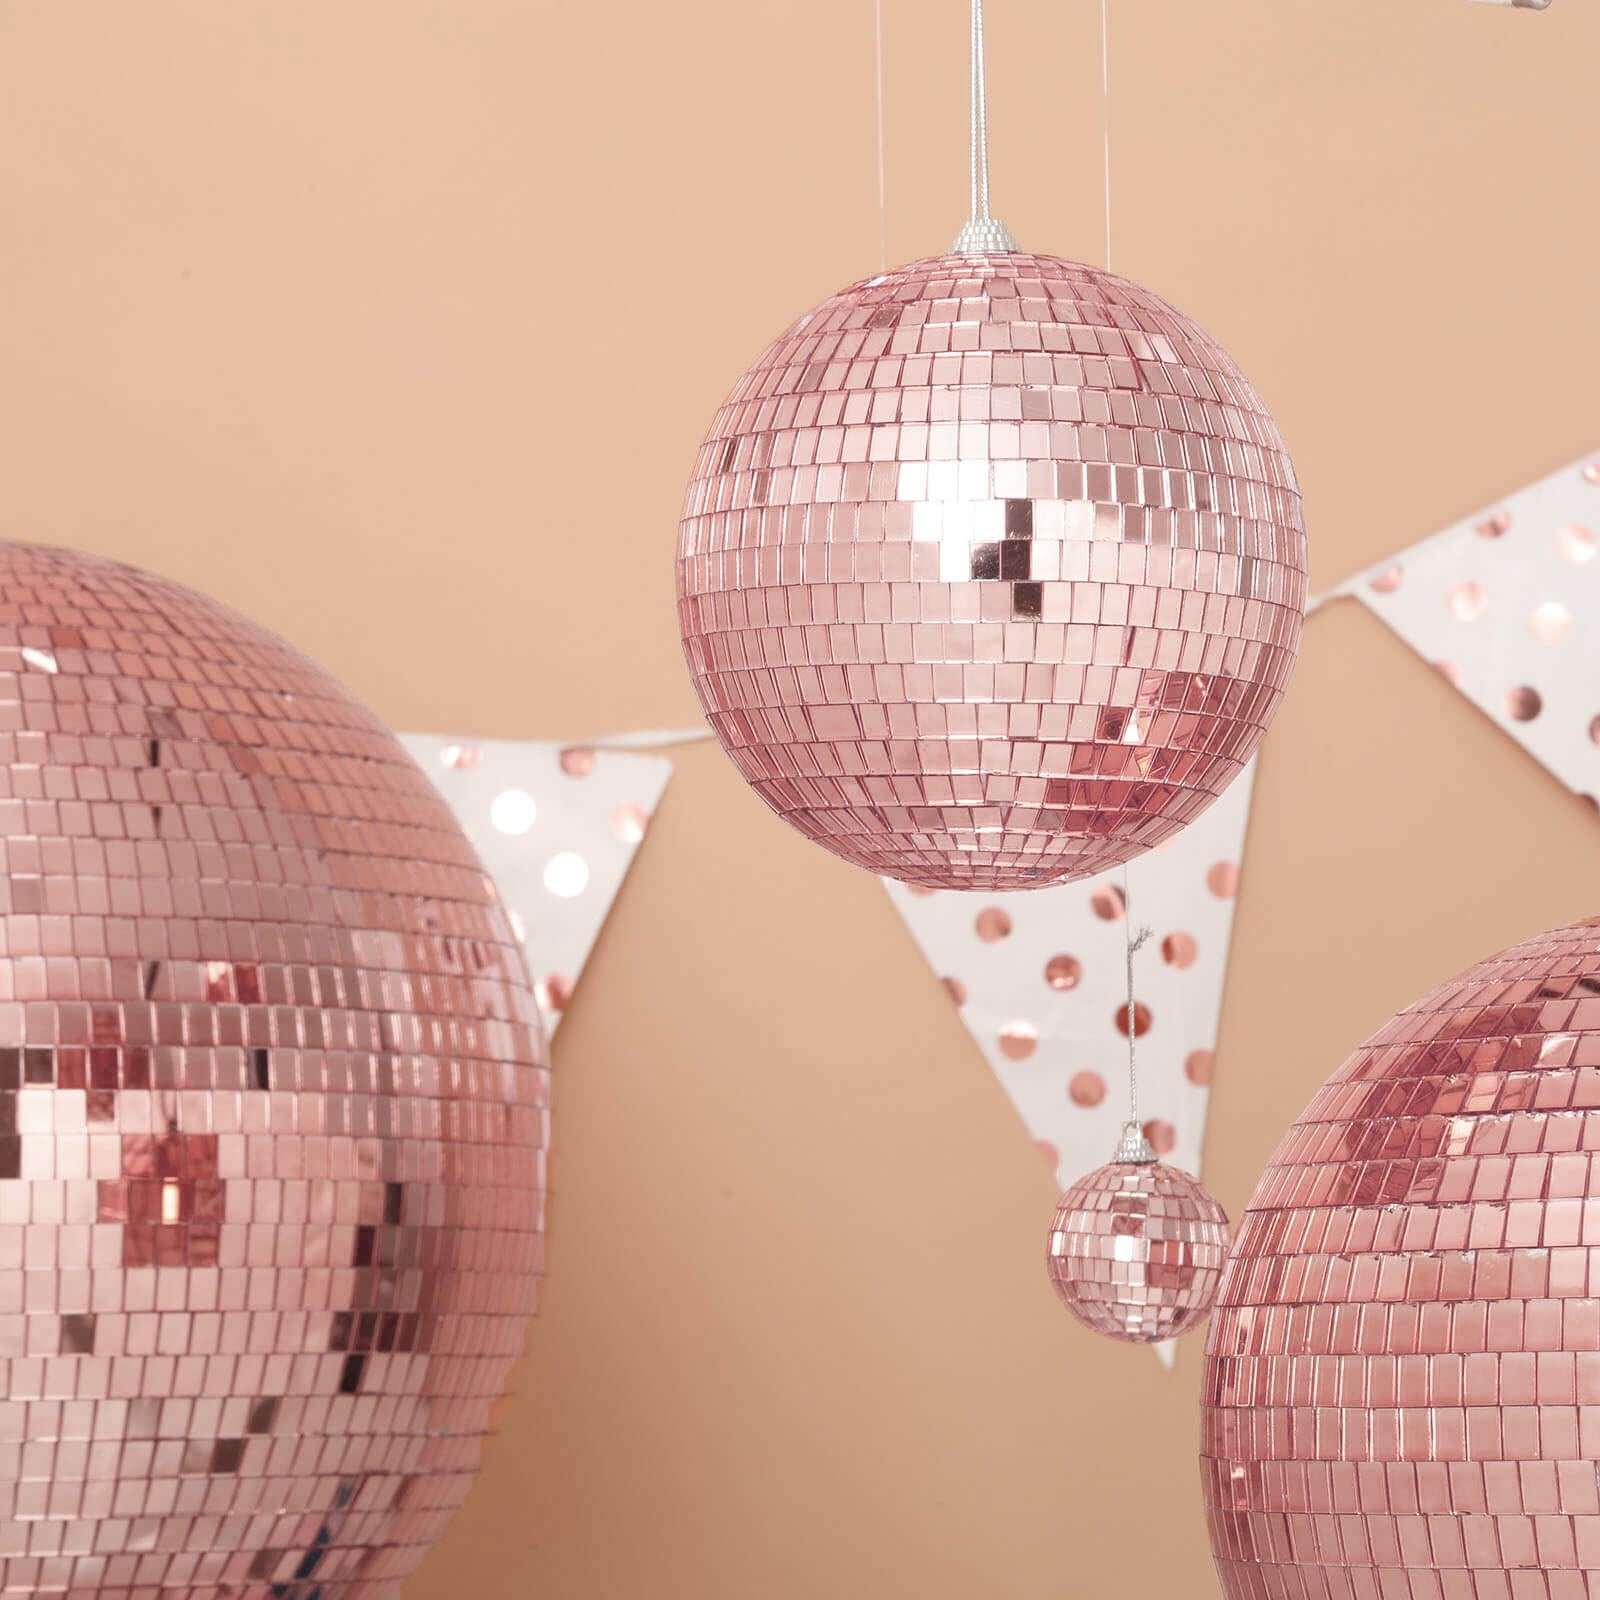 8 inch Mirror Disco Ball Great for Stage Lighting Effect or As A Room Decor. (Rose Gold), Adult Unisex